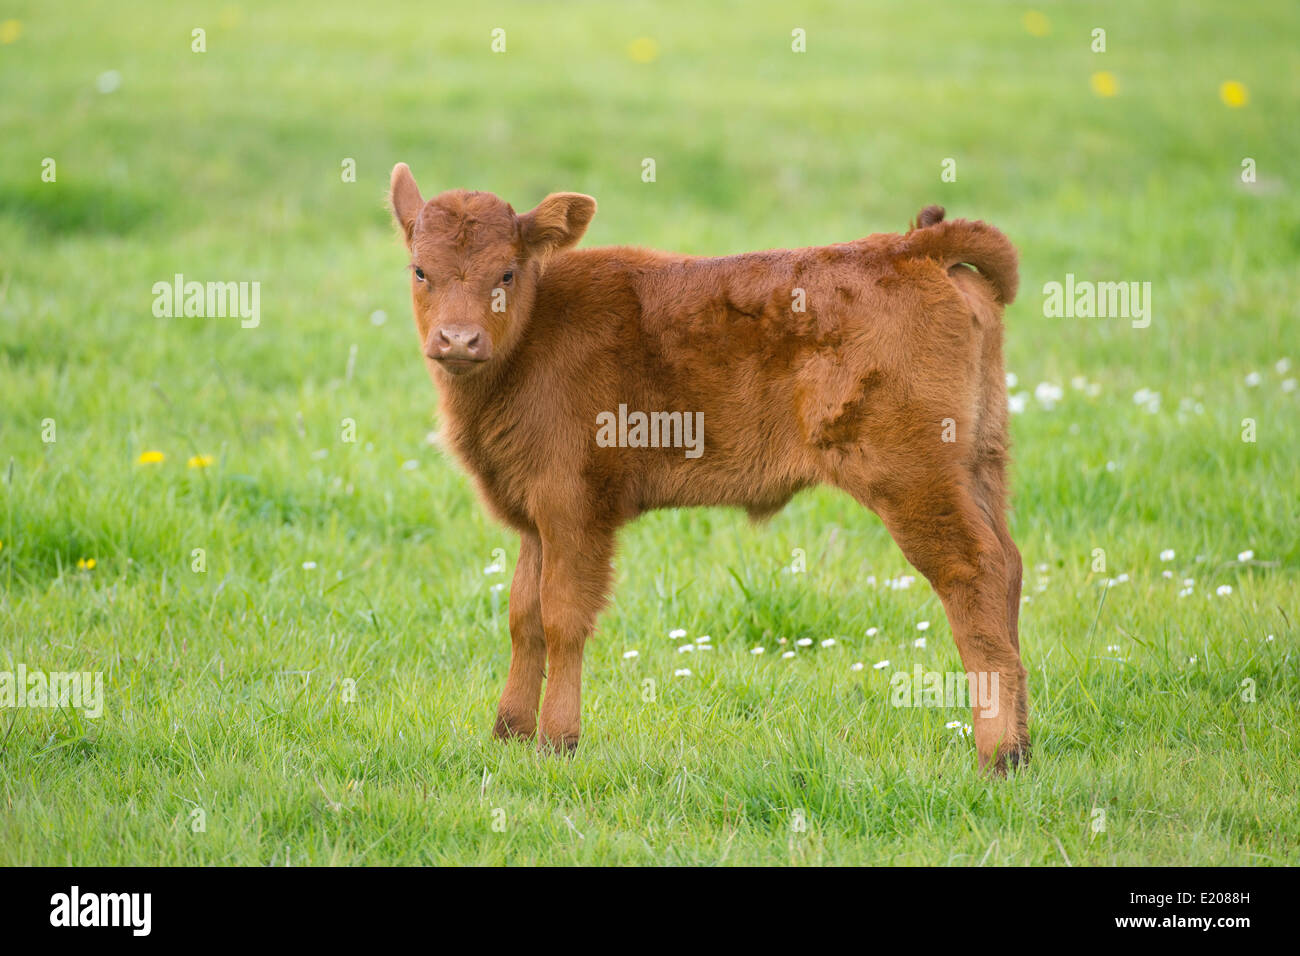 Domestic Cattle (Bos primigenius taurus) calf standing on a pasture, Lower Saxony, Germany Stock Photo